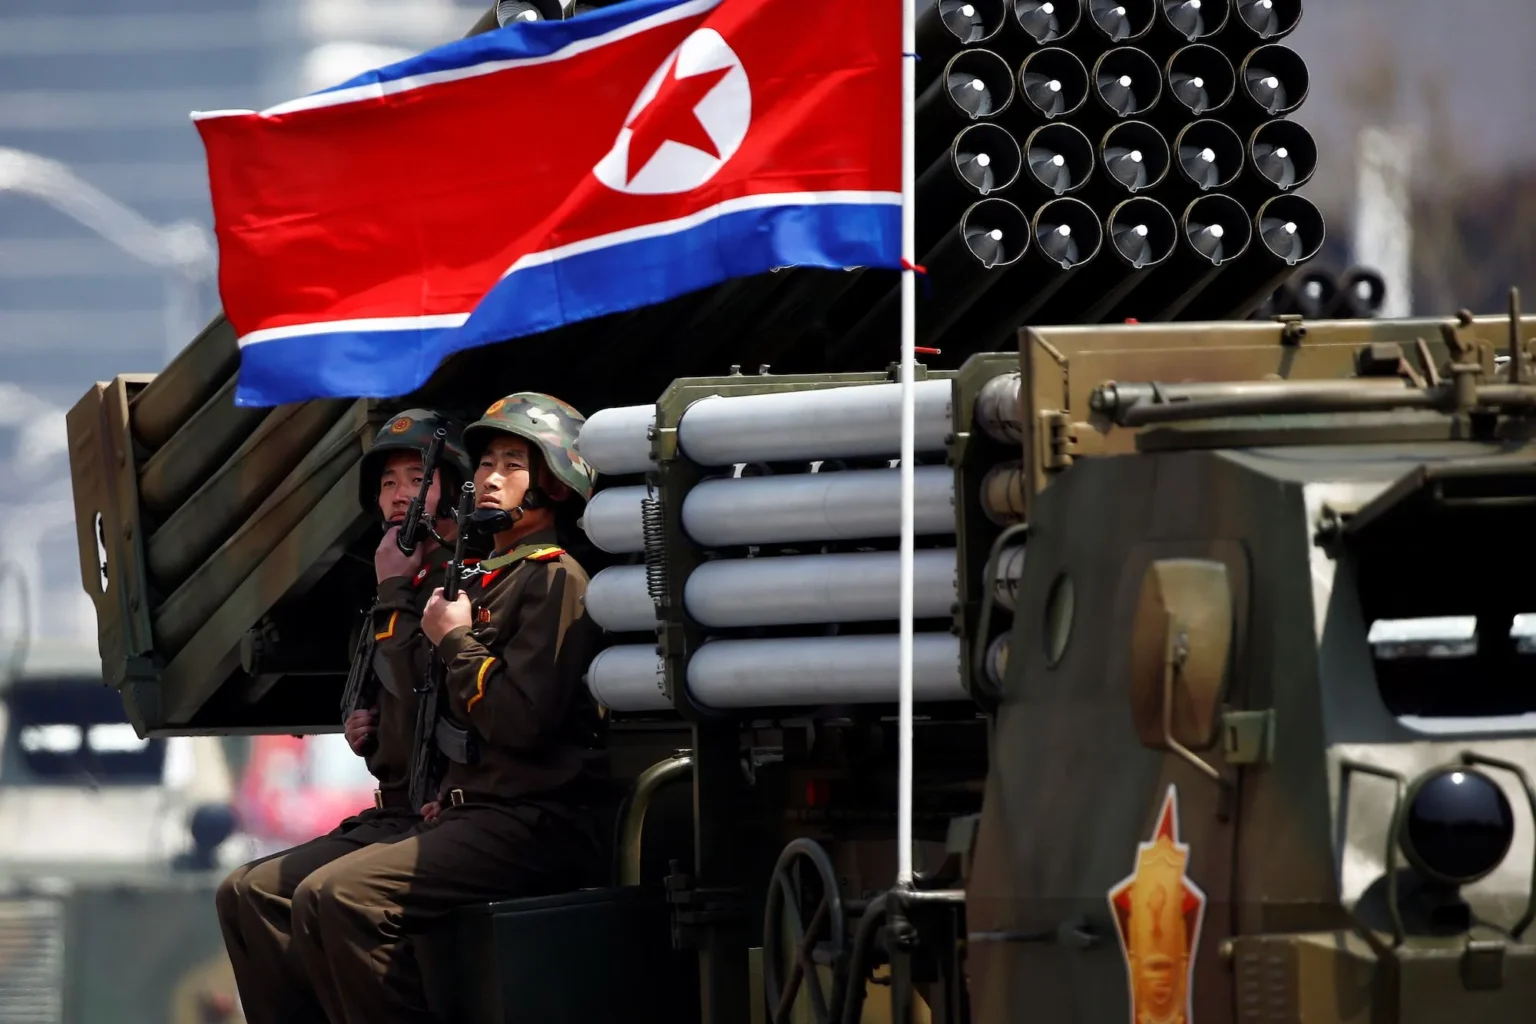 north-korea-sent-russia-about-6700-containers-carrying-millions-of-munitions-south-korea